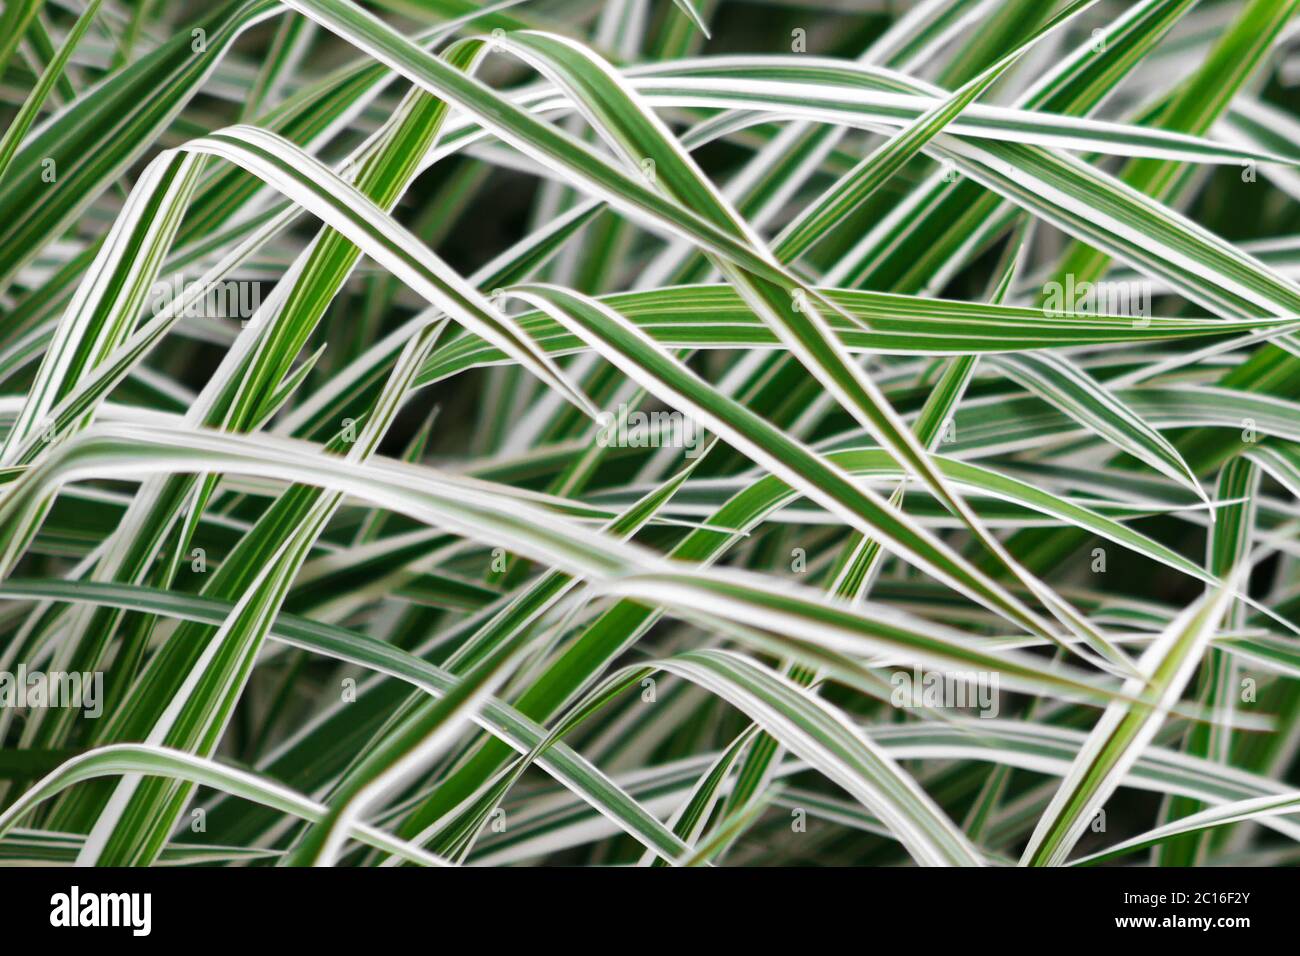 defocused background of Phalaris leaves, stripy white and green color grass Stock Photo